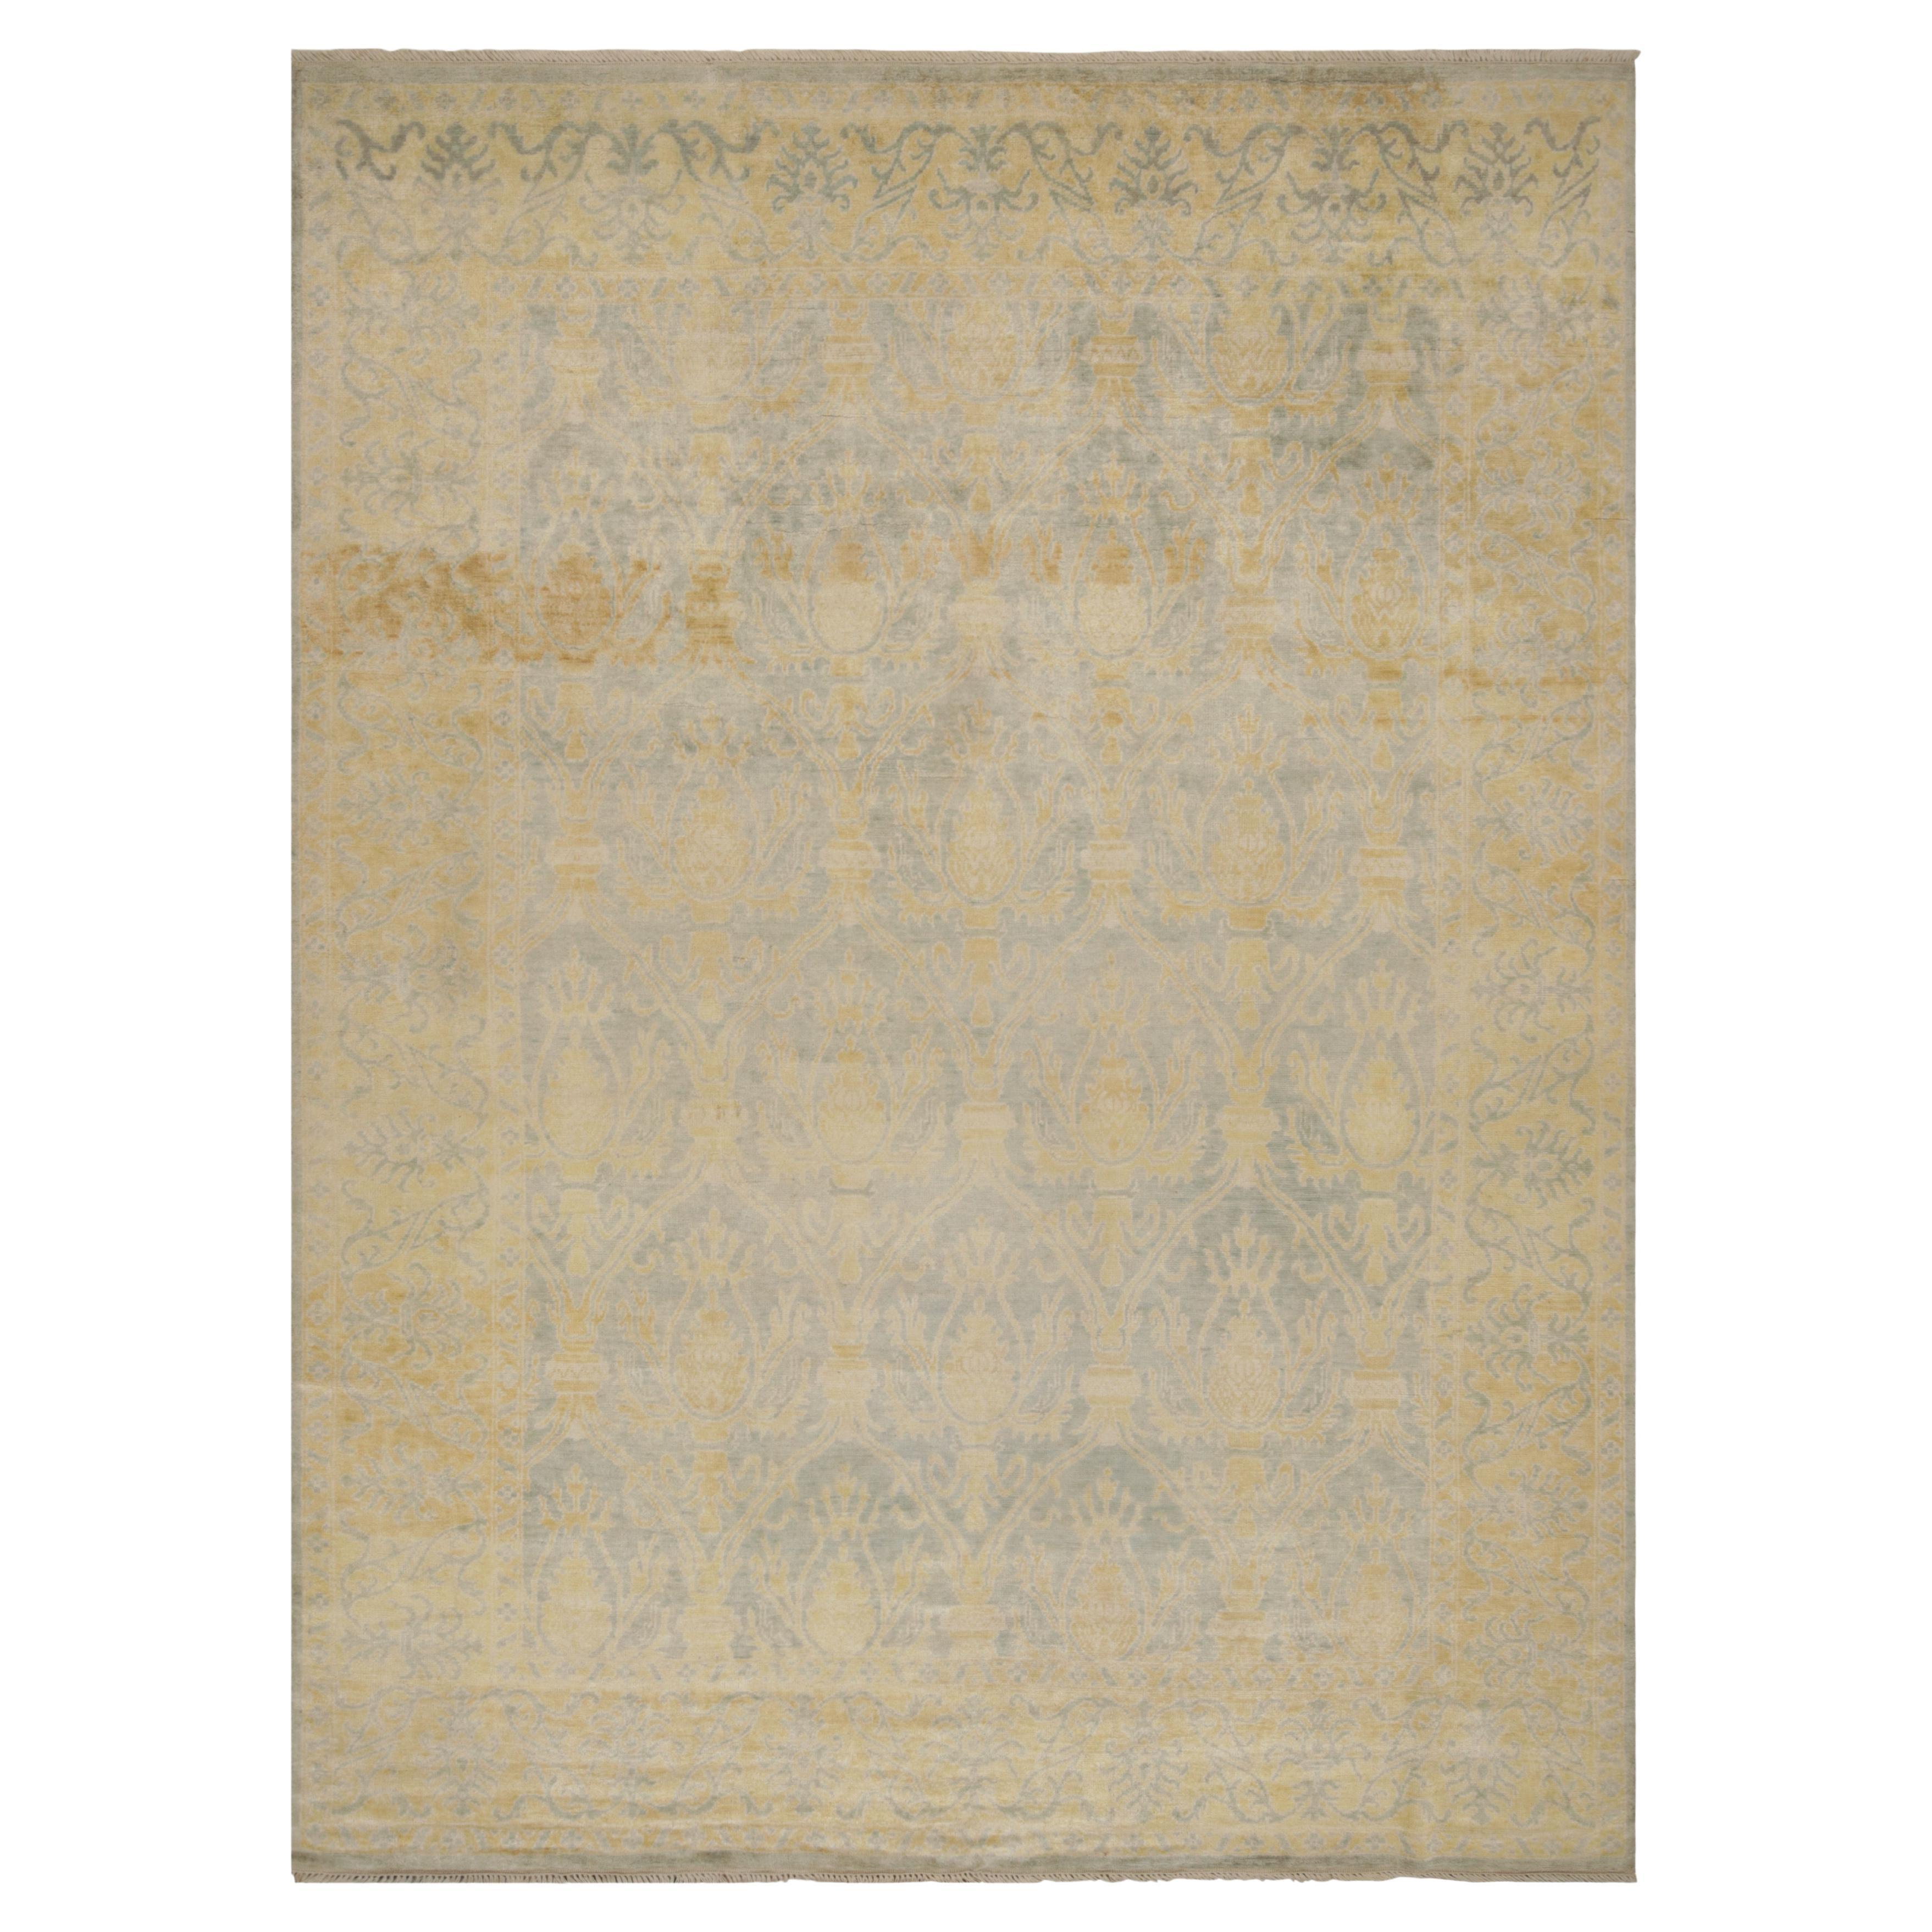 Rug & Kilim’s Oushak Style Rug in Blue and Gold with Floral Patterns